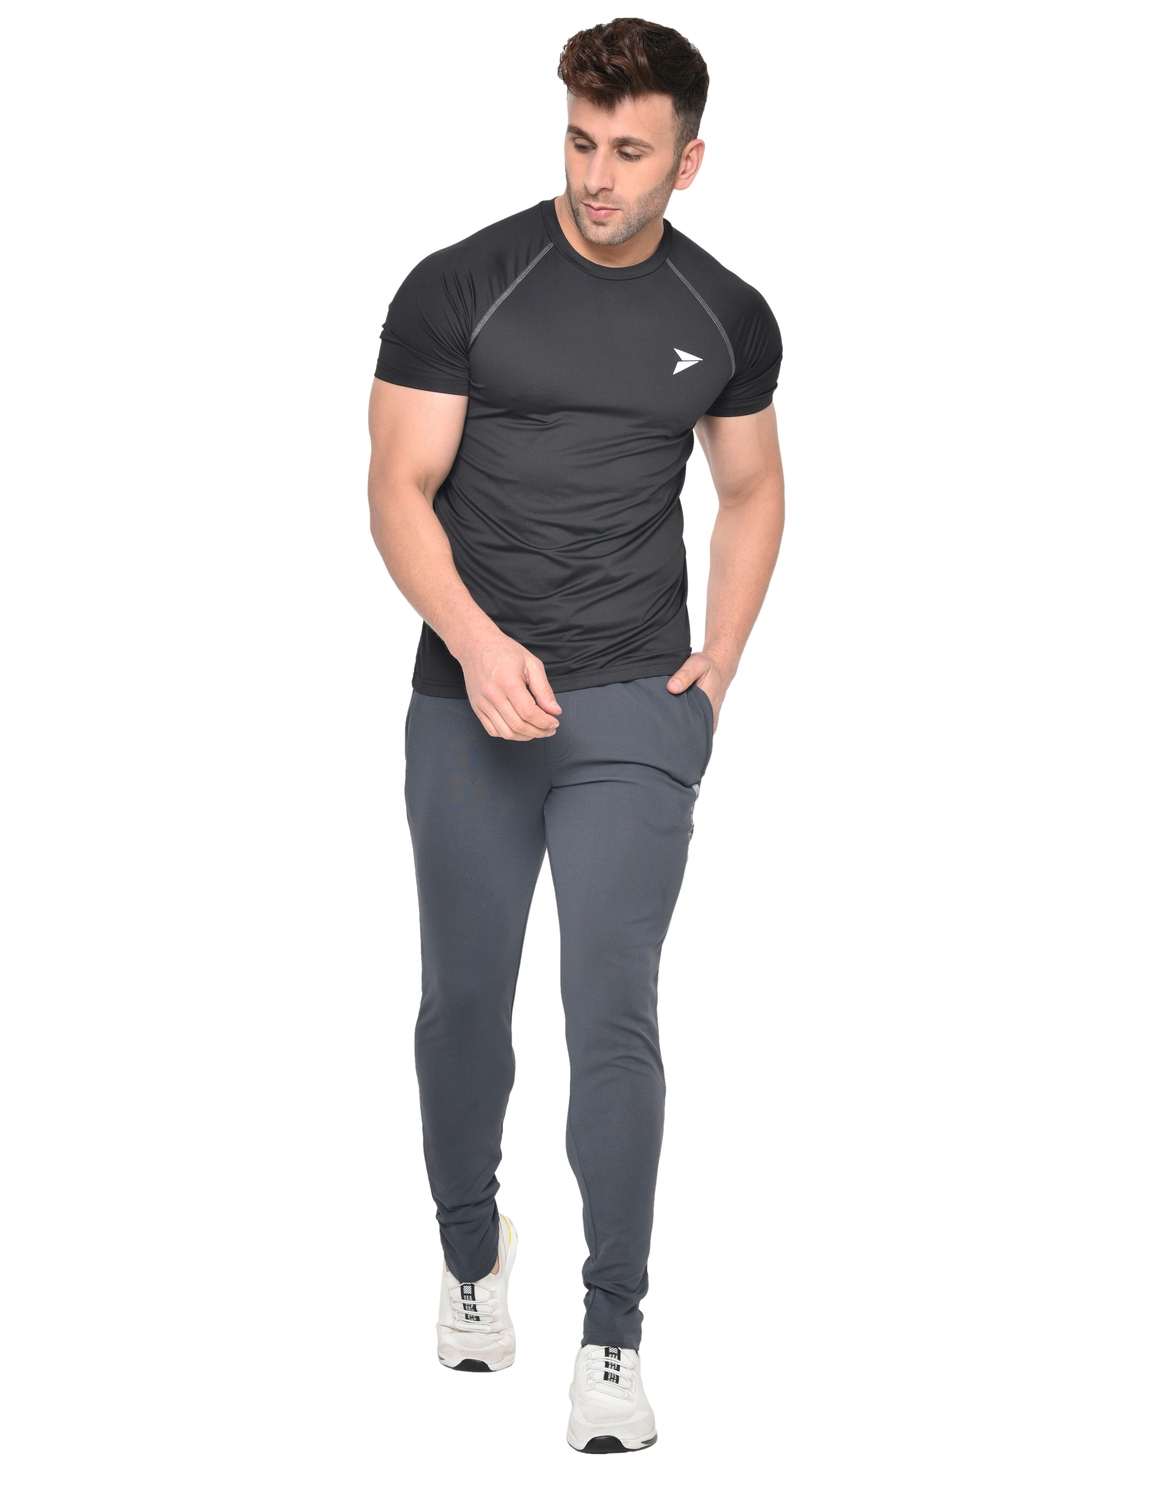 Fitinc | Fitinc Gym & Yoga Grey Track Pant For Men with Zipper Pockets